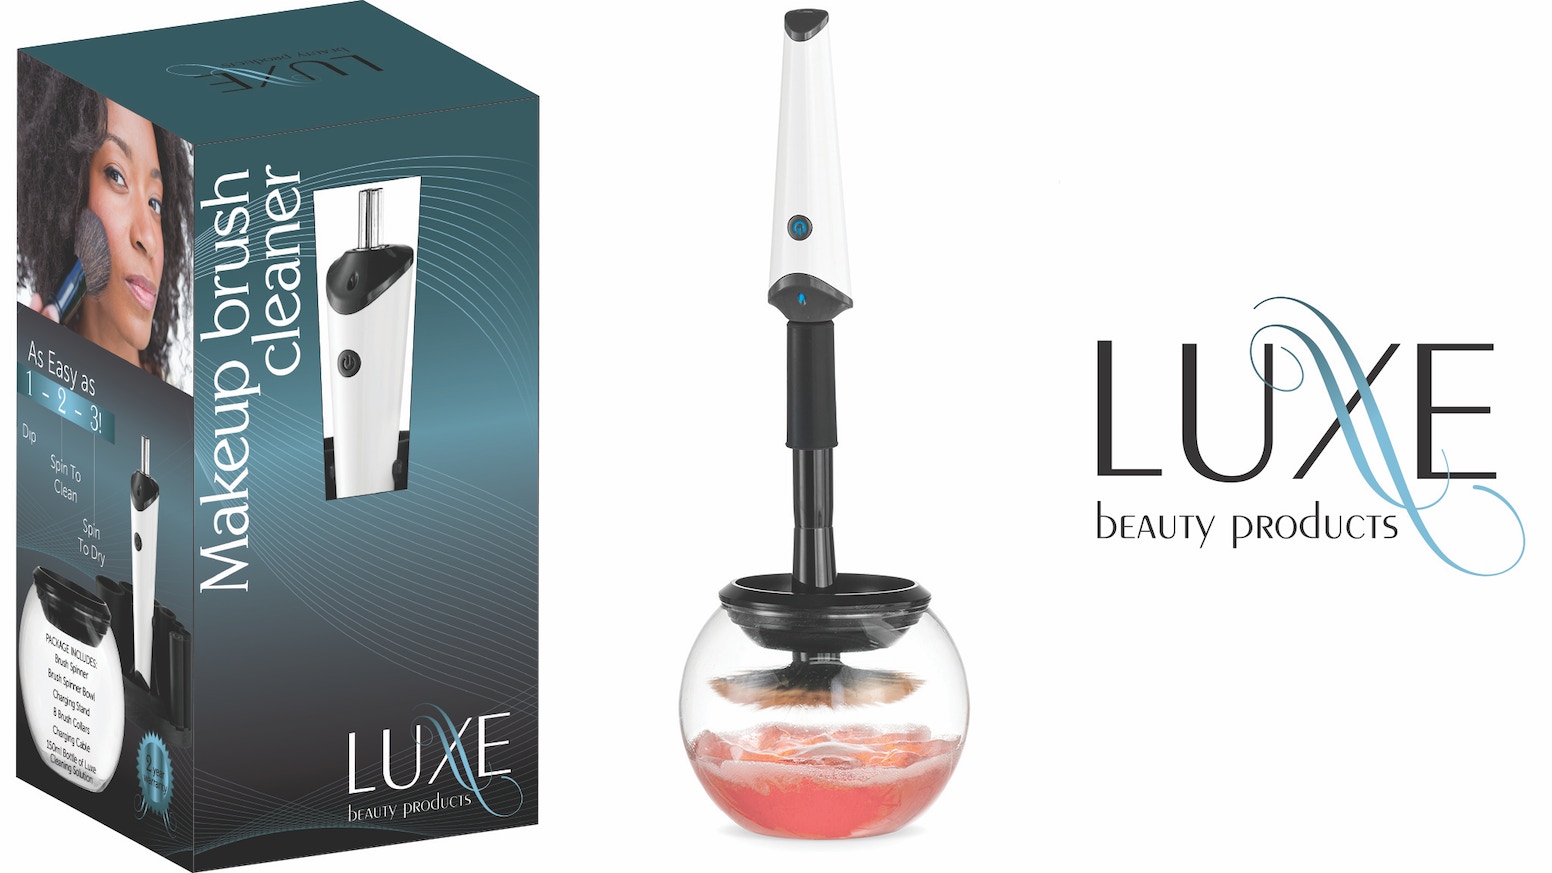 Luxe Makeup Brush Cleaner